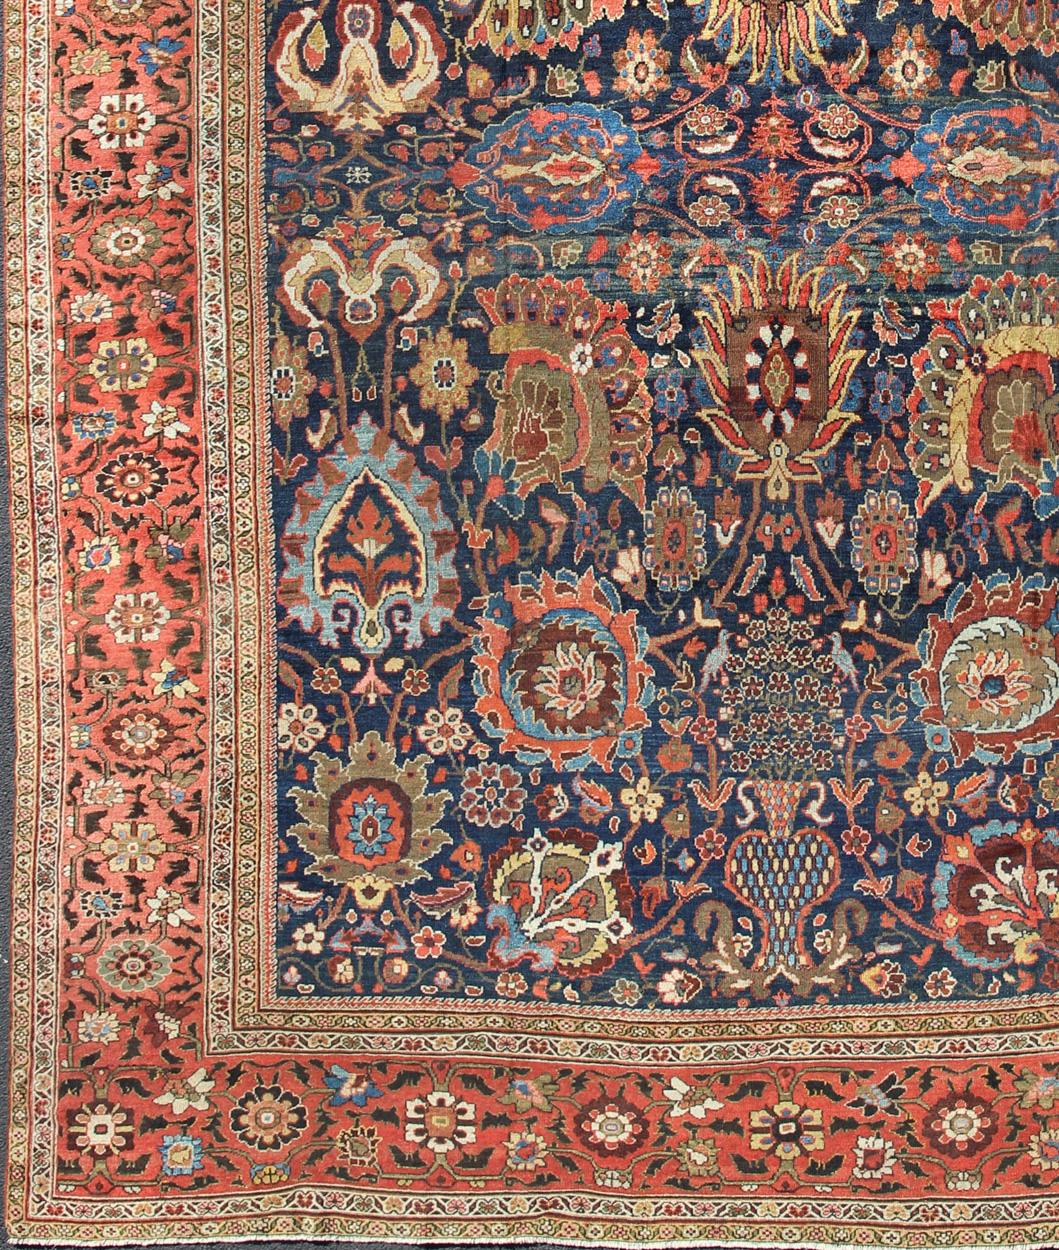 Exceptional Large Antique Sultanabad Rug in Midnight Blue and Coral Red. Keivan Woven Arts / rug M14-0305, country of origin / type: Iran / Sultanabad, circa 1900. 
Measure: 13.1 x 17.1.
This exceptional antique Sultanabad showcases a marvelous